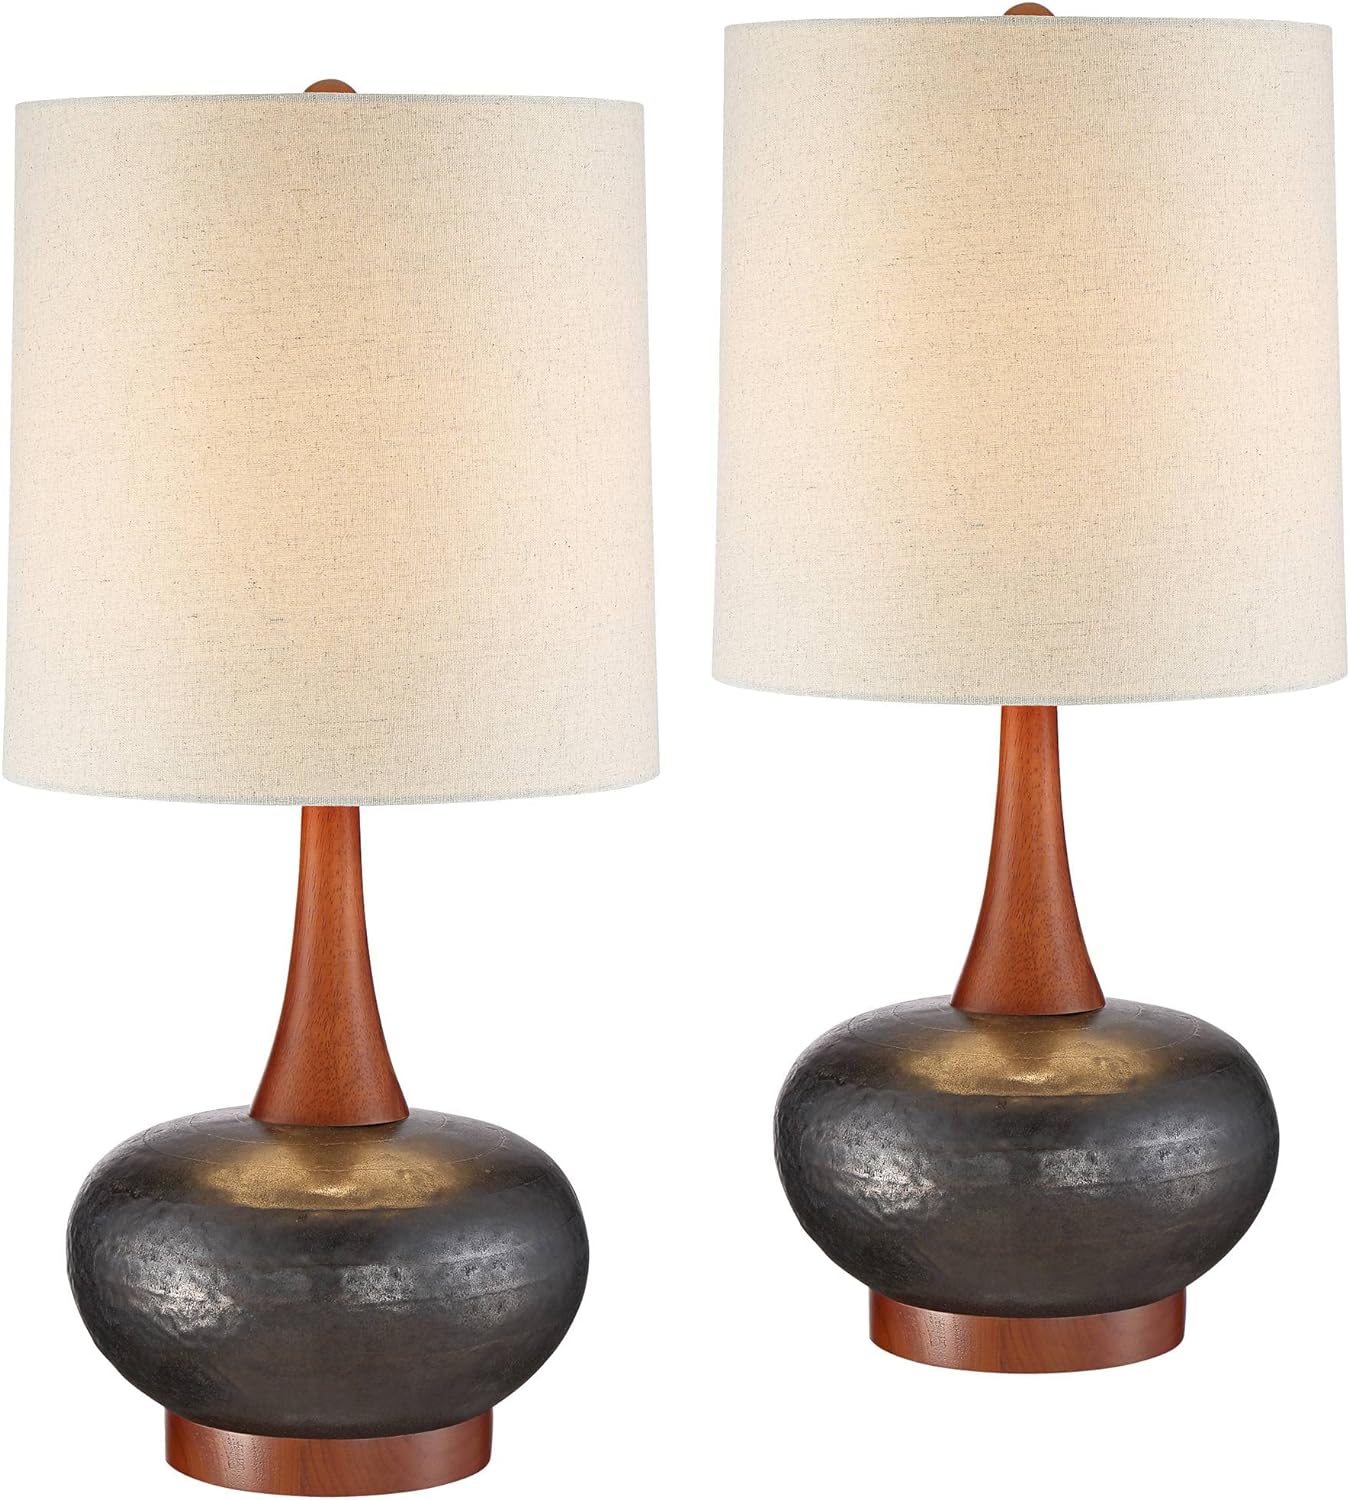 360 Lighting Andi Mid Century Modern Table Lamps 24 1/2" Tall Set of 2 Brown Hammered Ceramic Red Oak Wood Off-White Fabric Shade for Bedroom Living Room Bedside Nightstand House Home Office